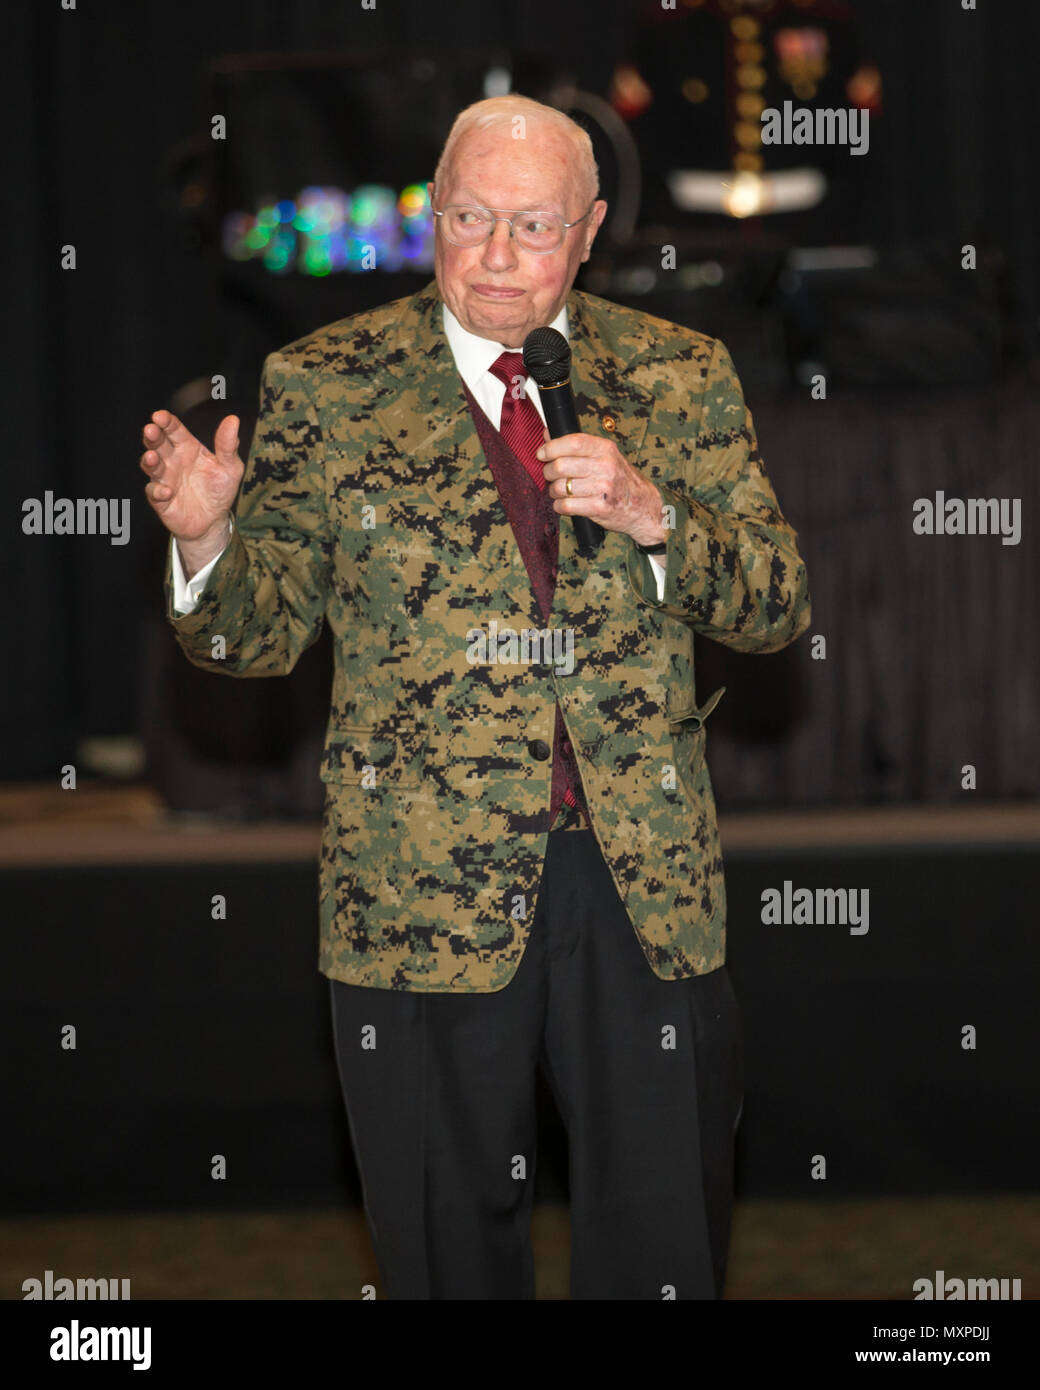 The 29th Commandant of the Marine Corps Gen. Alfred Gray (ret.), speaks to Marines and guests during Marine Corps Intelligence Activity’s 241st Marine Corps birthday ball ceremony at the Fredericksburg Expo and Conference Center in Fredericksburg, Va., Nov. 10, 2016. The Continental Marines were established on this date in 1775, and the United States Marine Corps celebrates every year with a traditional birthday ball and cake-cutting ceremony. (U.S. Marine Corps photo by Cpl. Jacqueline A. Garcia) Stock Photo